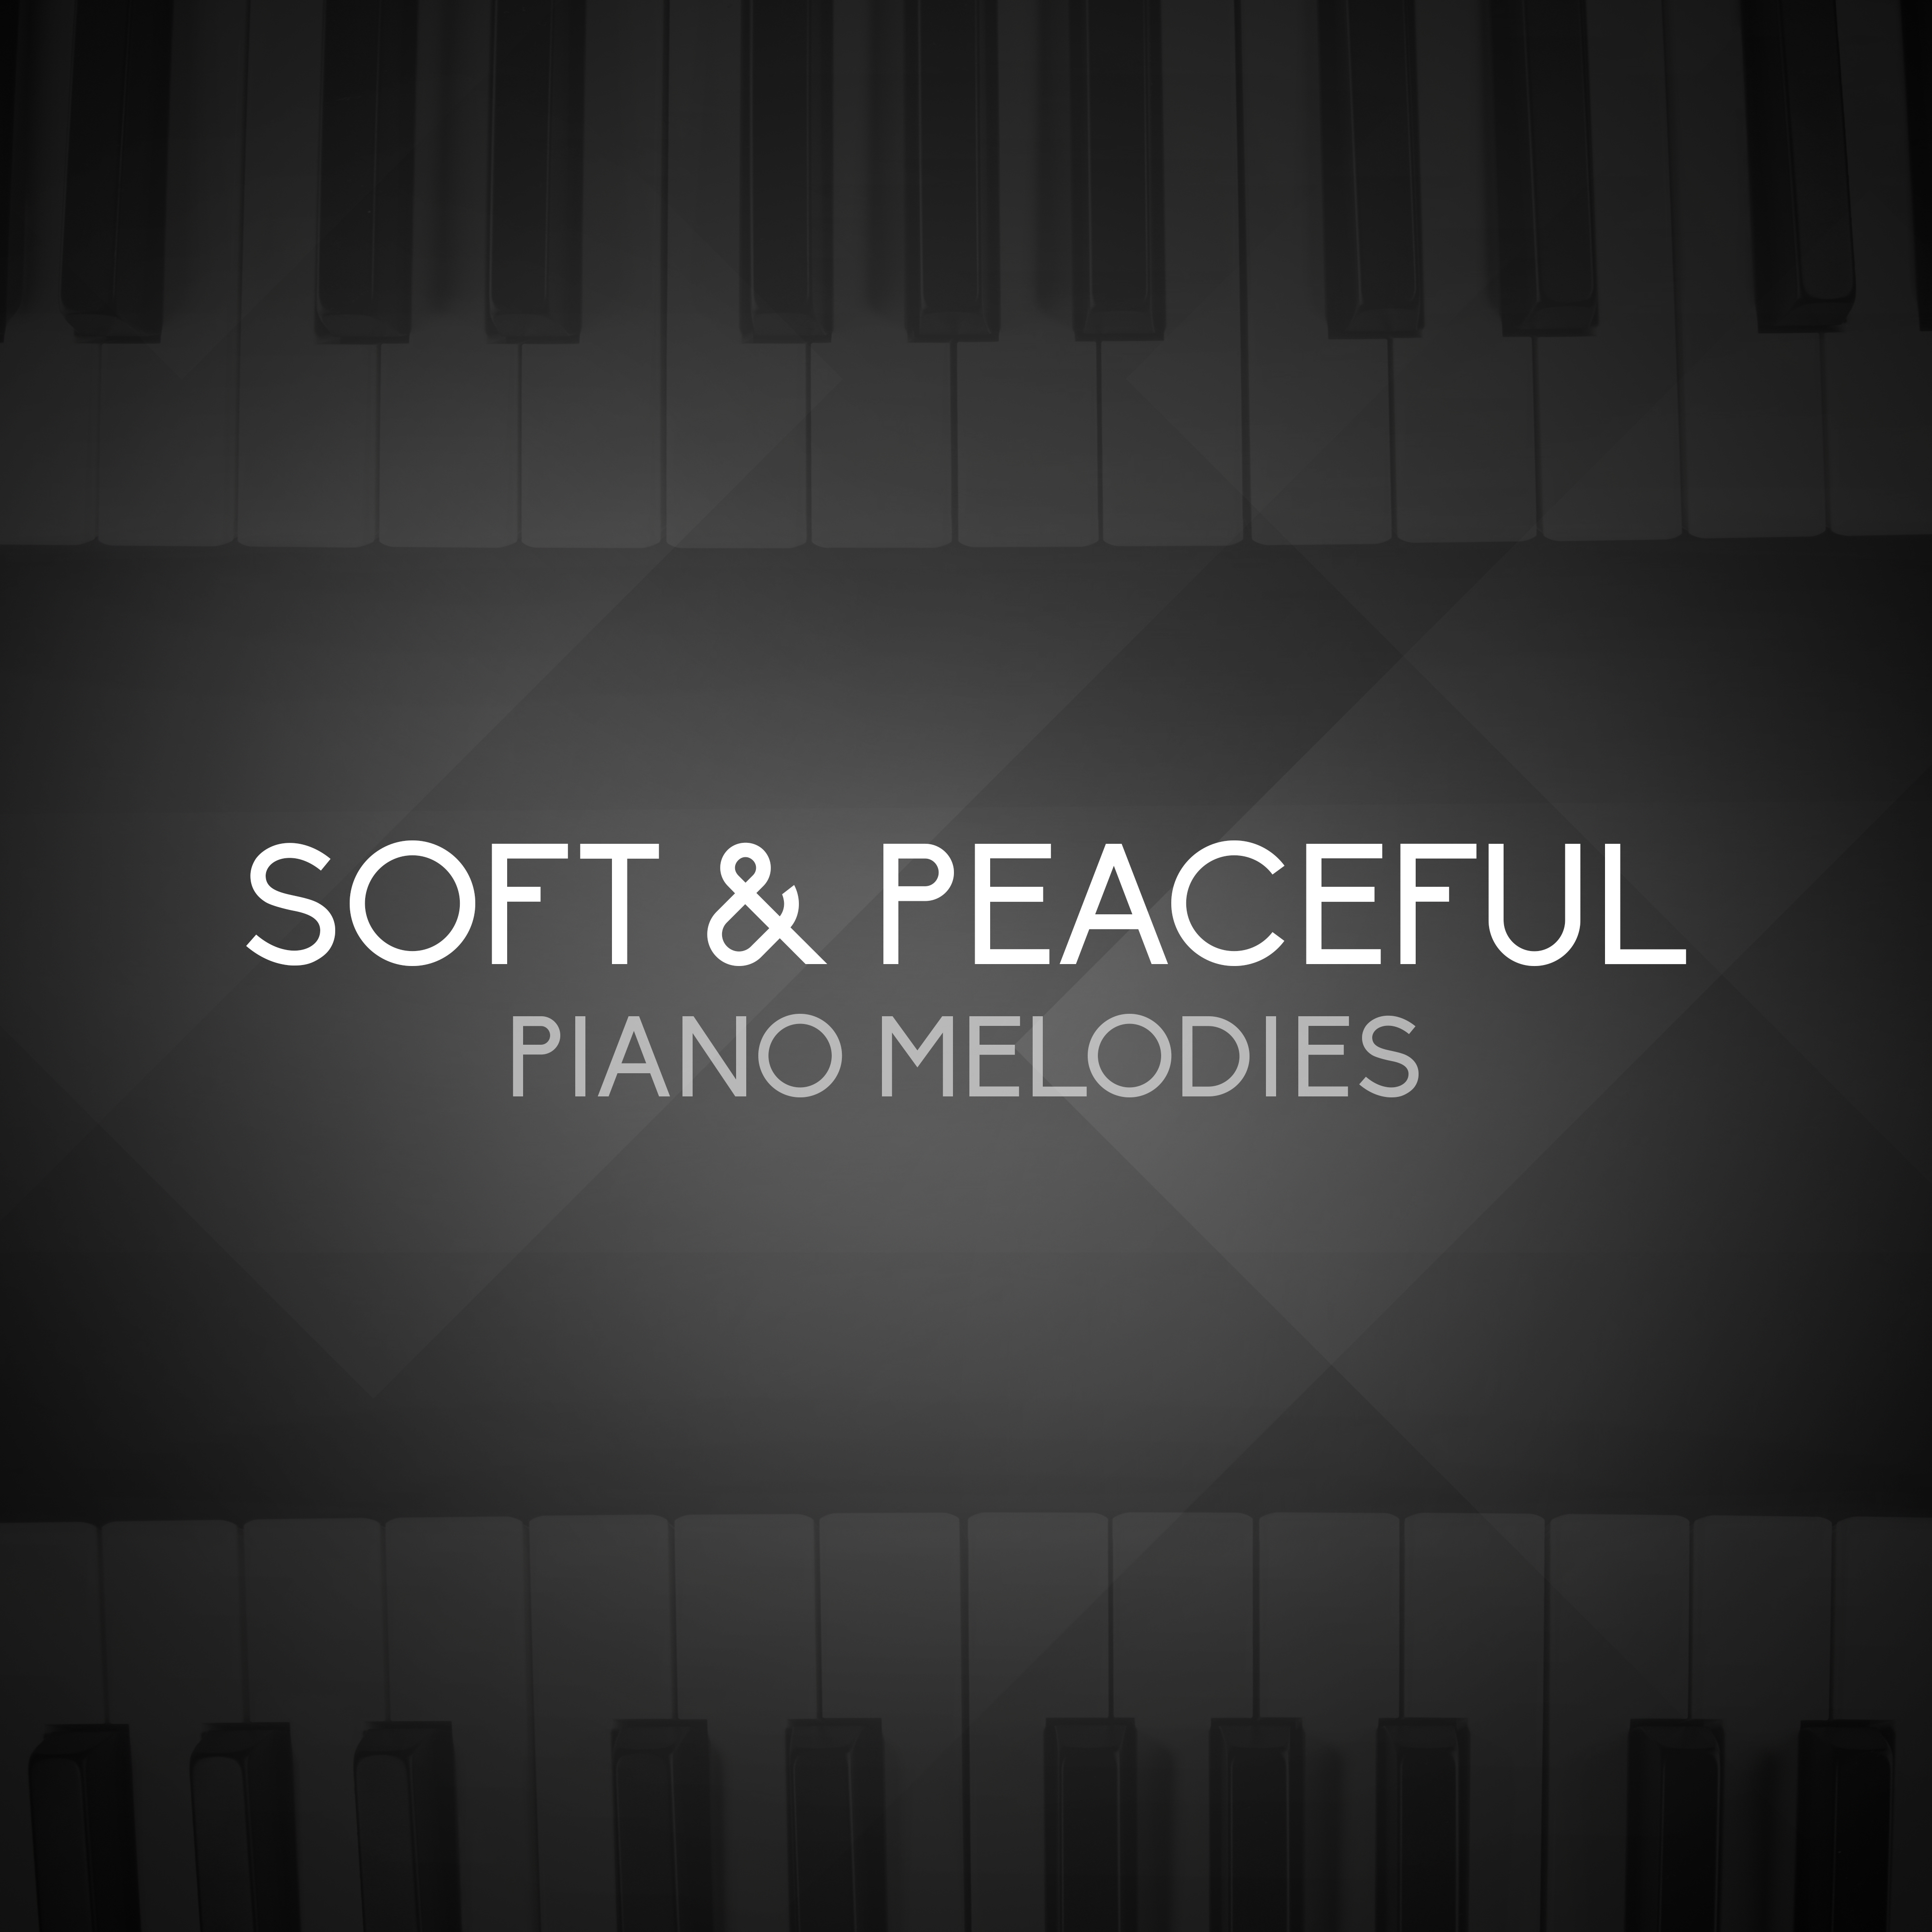 Soft & Peaceful Piano Melodies